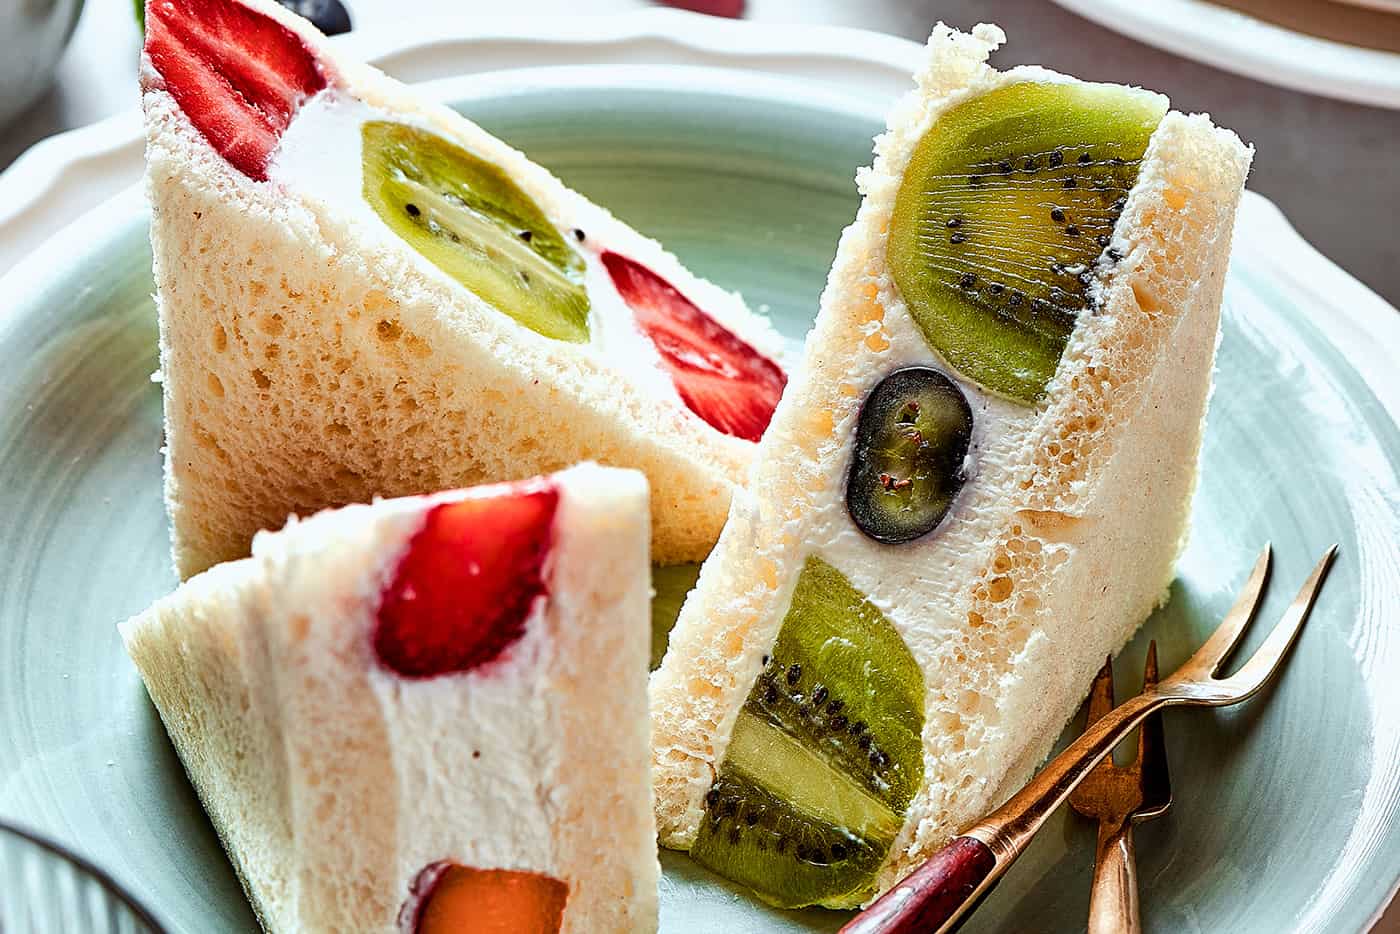 sandwich triangles made with soft bread, fluffy whipped cream, and fresh fruit